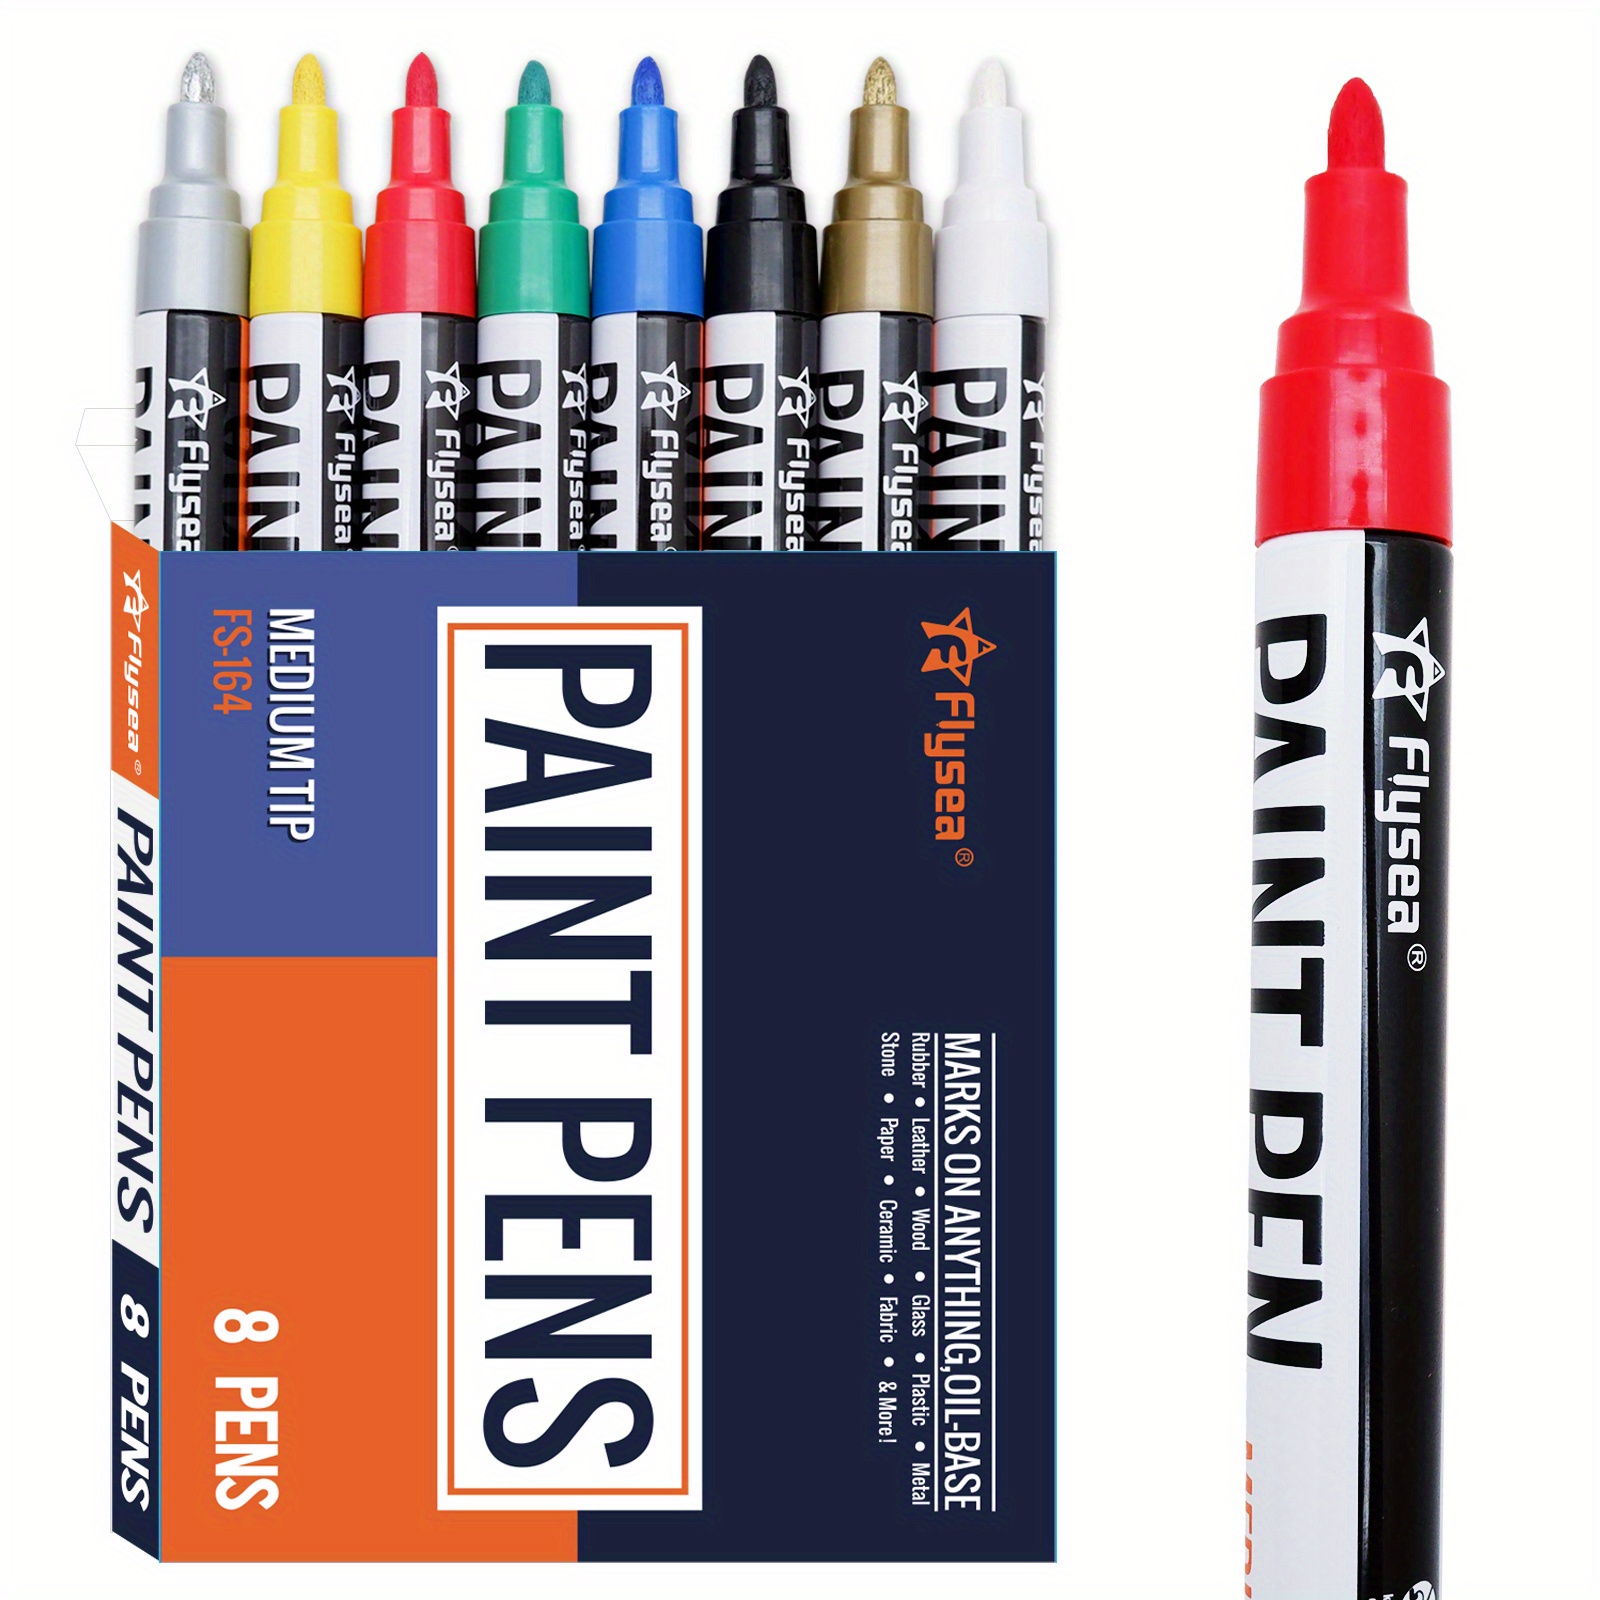 Paint Marker Pens - 8 Colors Oil Based Paint Markers, Permanent,  Waterproof, Quick Dry, Medium Tip, Assorted Color Paint Pen for Metal,  Wood, Fabric, Plastic, Rock Painting, Stone, Mugs, Canvas